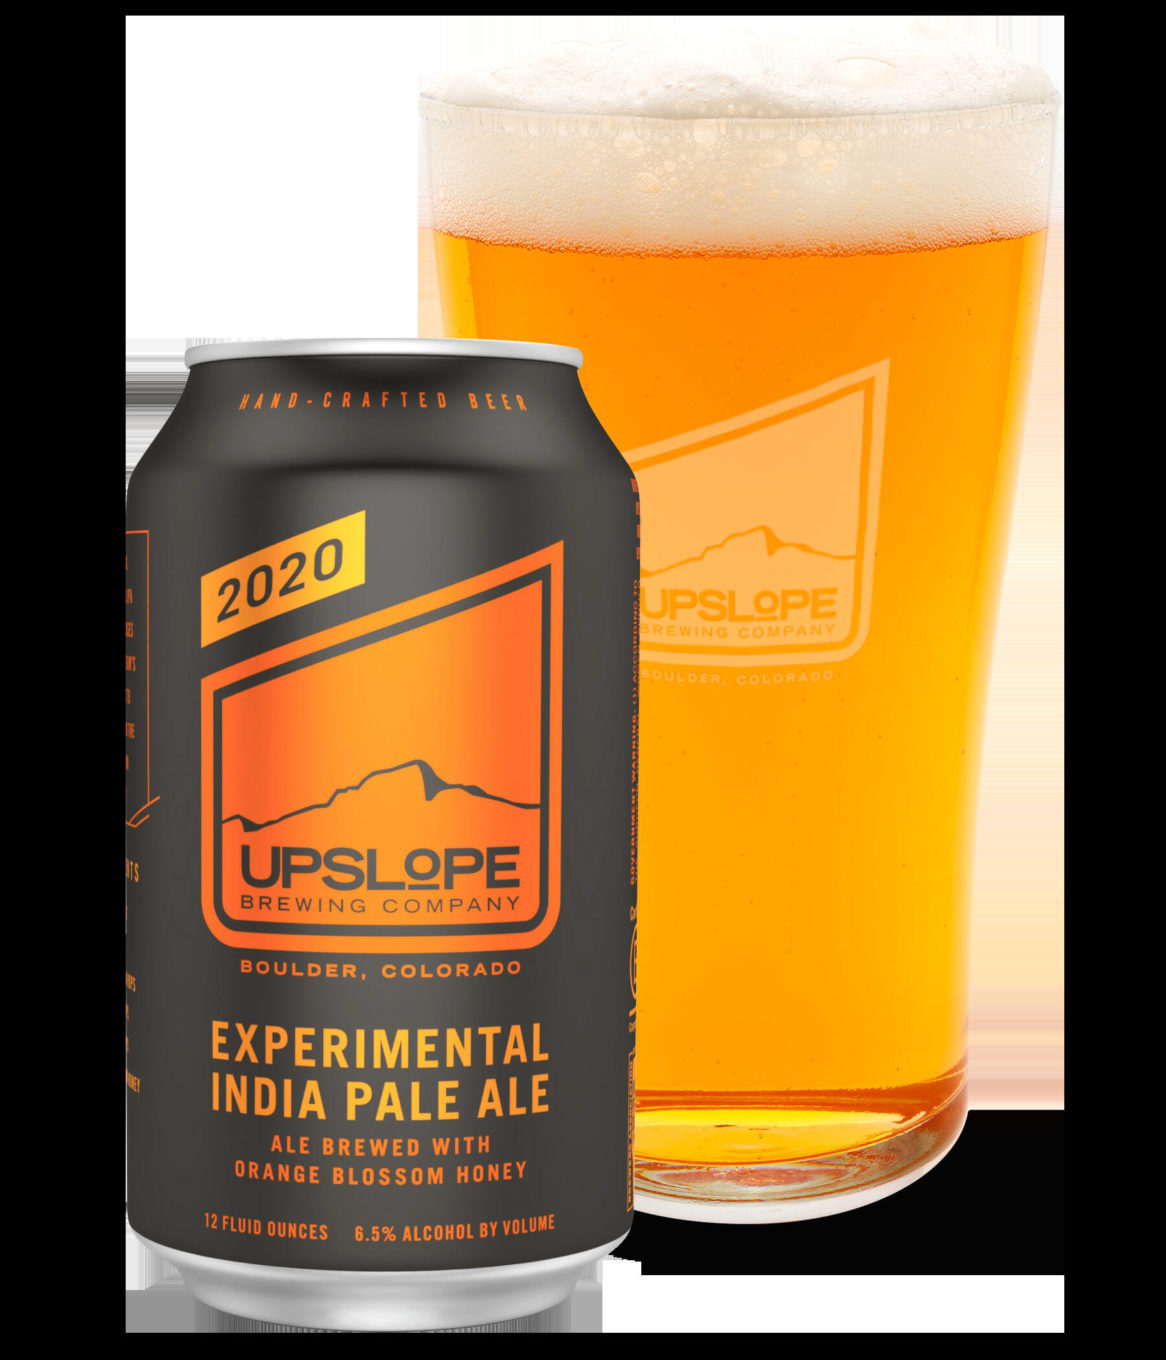 Upslope beer in a can and glass